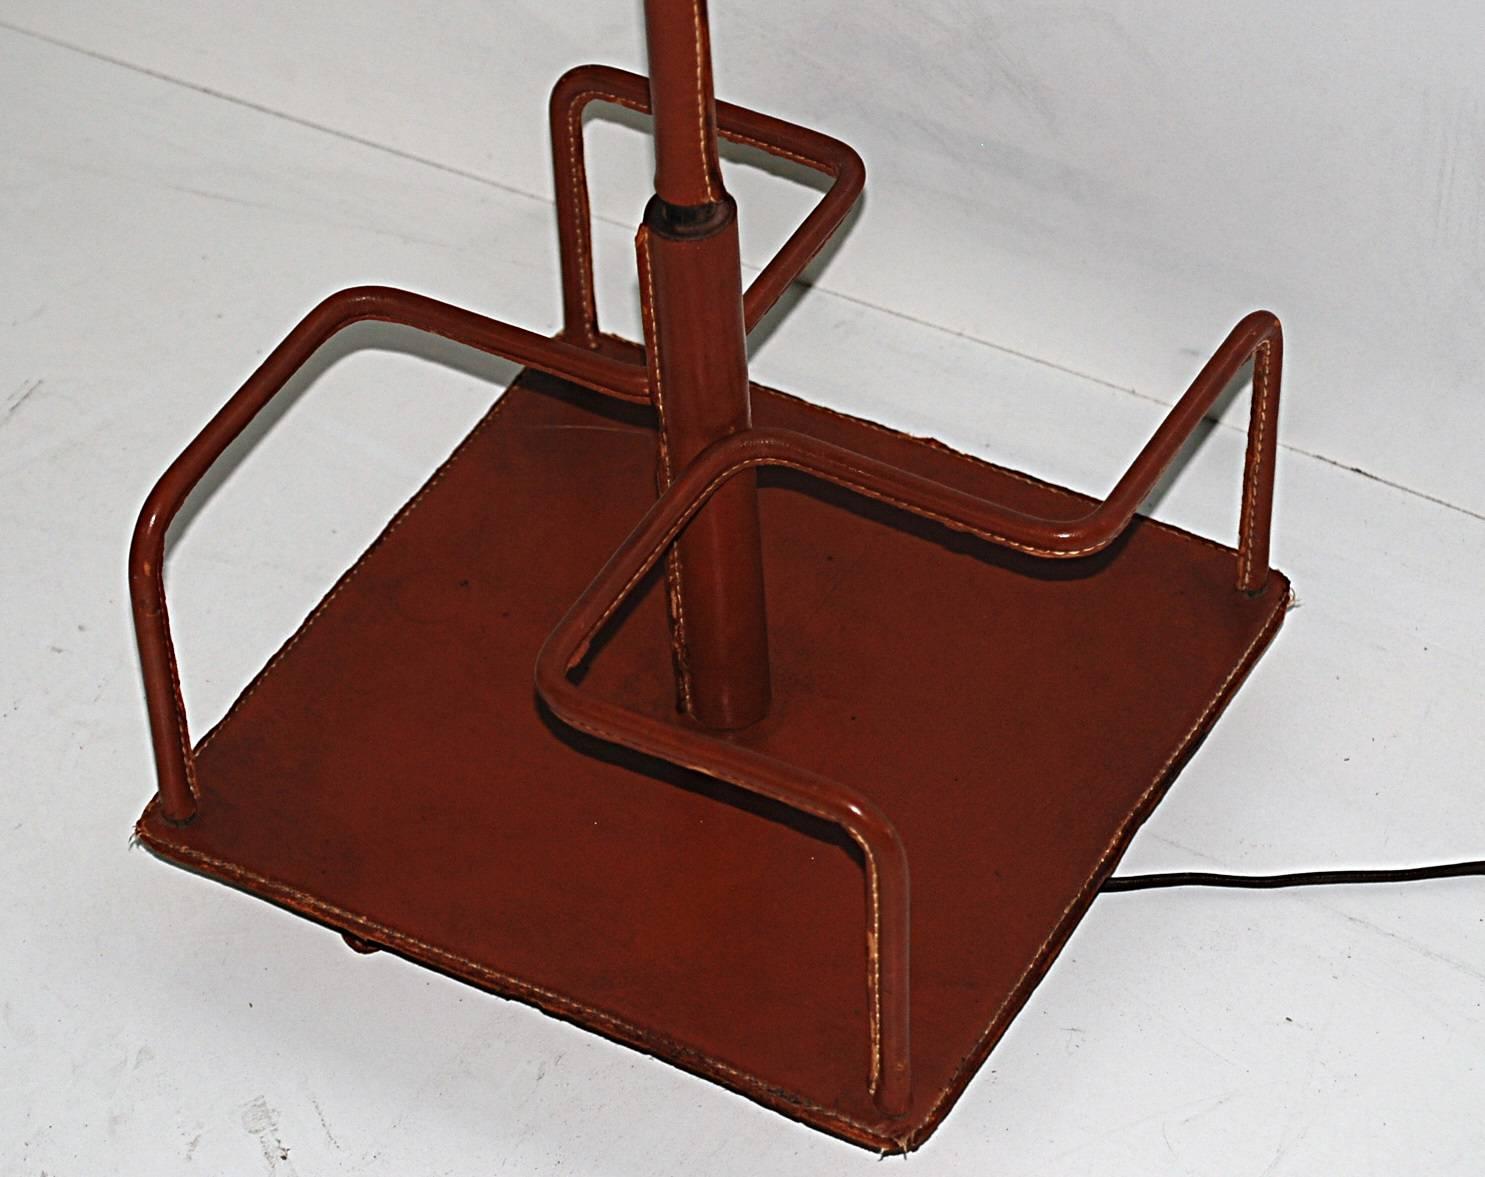 Rare Adnet leather bound book carousel stitched leather lamp.